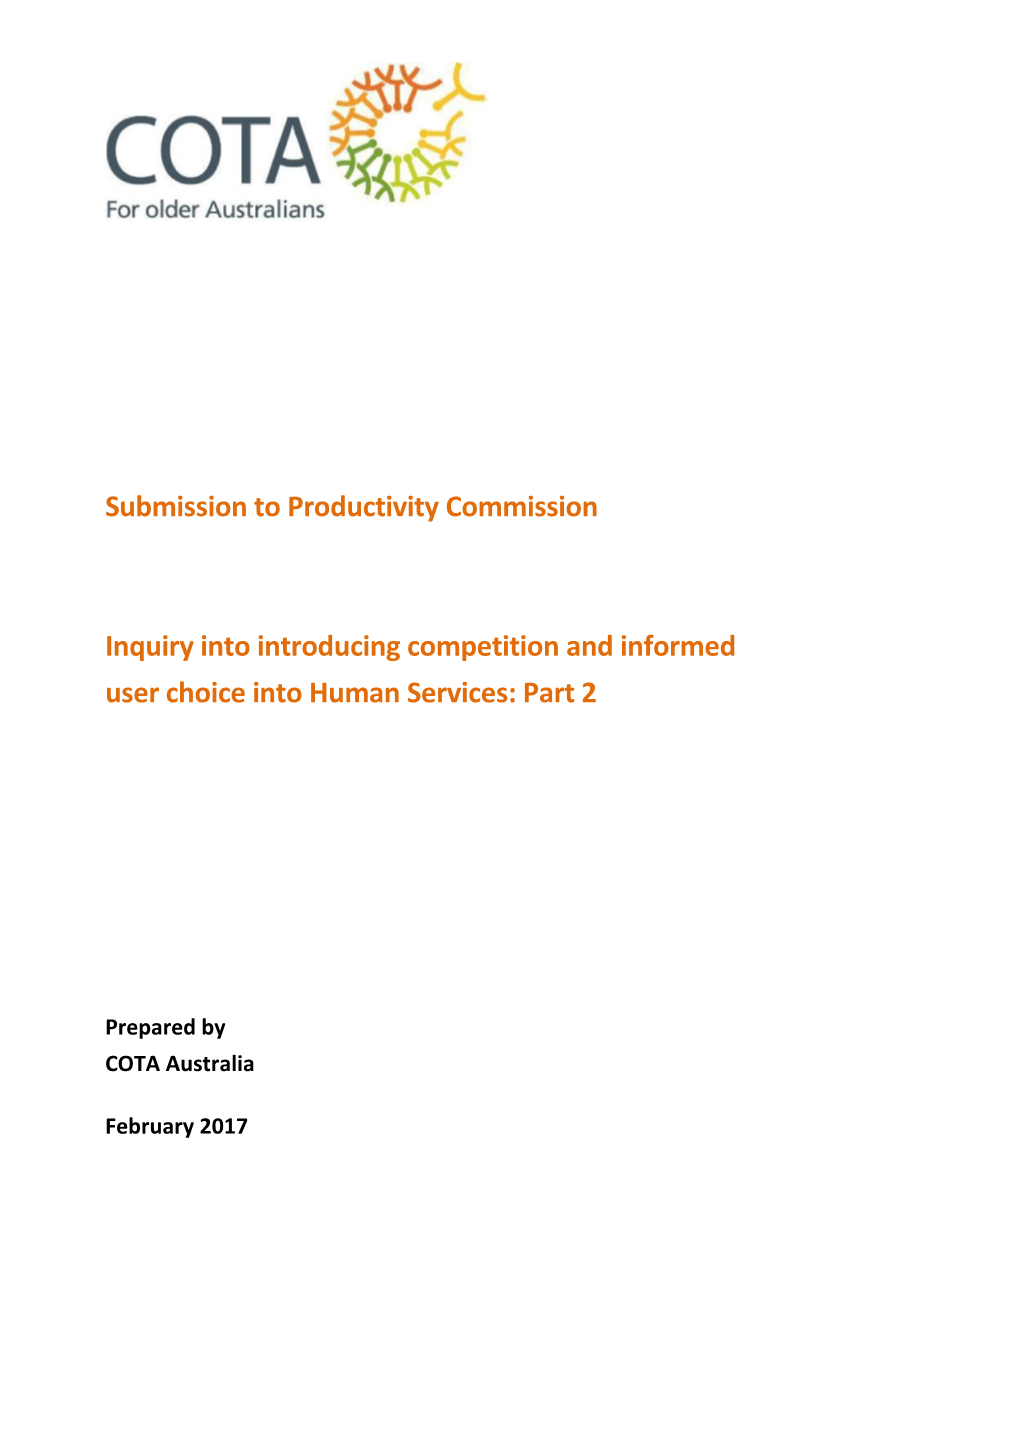 Submission 456 - COTA Australia - Reforms to Human Services - Stage 2 of Human Services